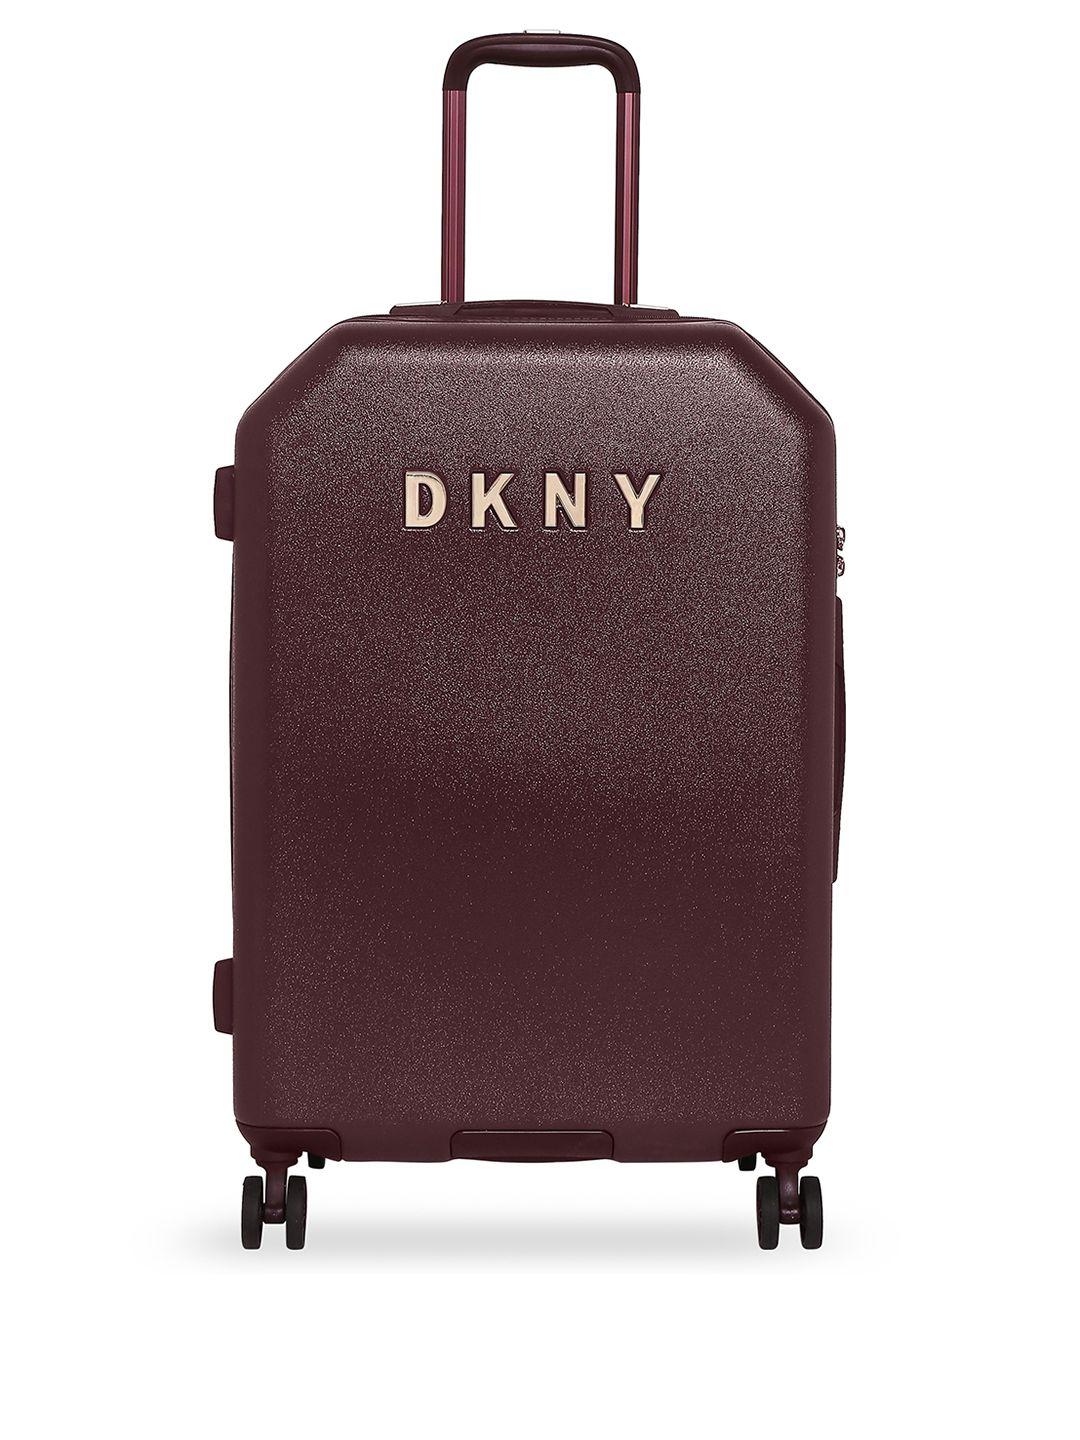 dkny allore unisex burgundy textured allore hard-sided large trolley suitcase